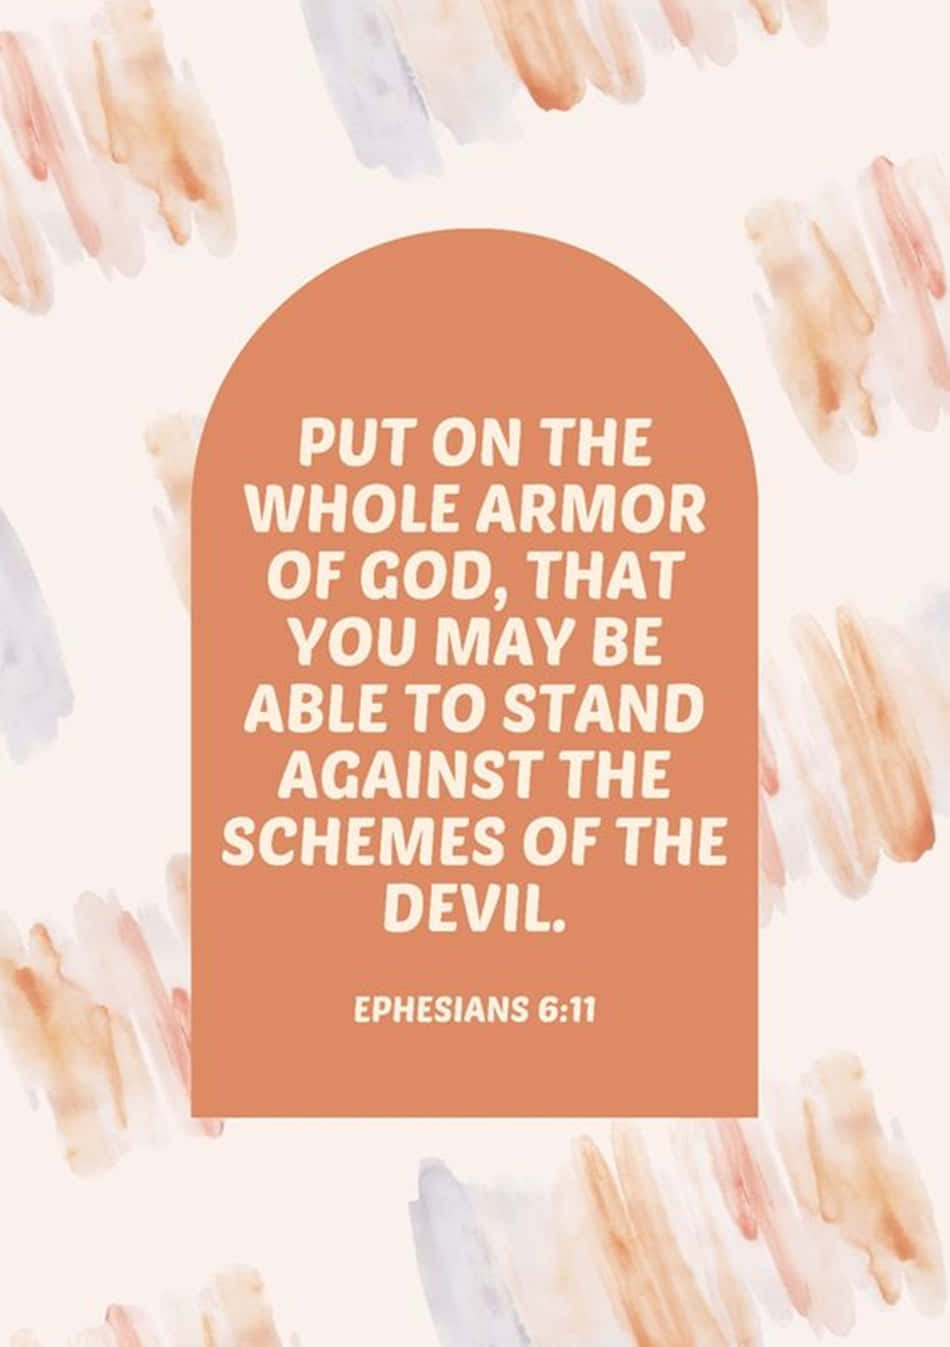 A Quote From The Bible That Says Put On The Armor Of God So That You May Stand Up Against The Scheming Of The Devil Wallpaper